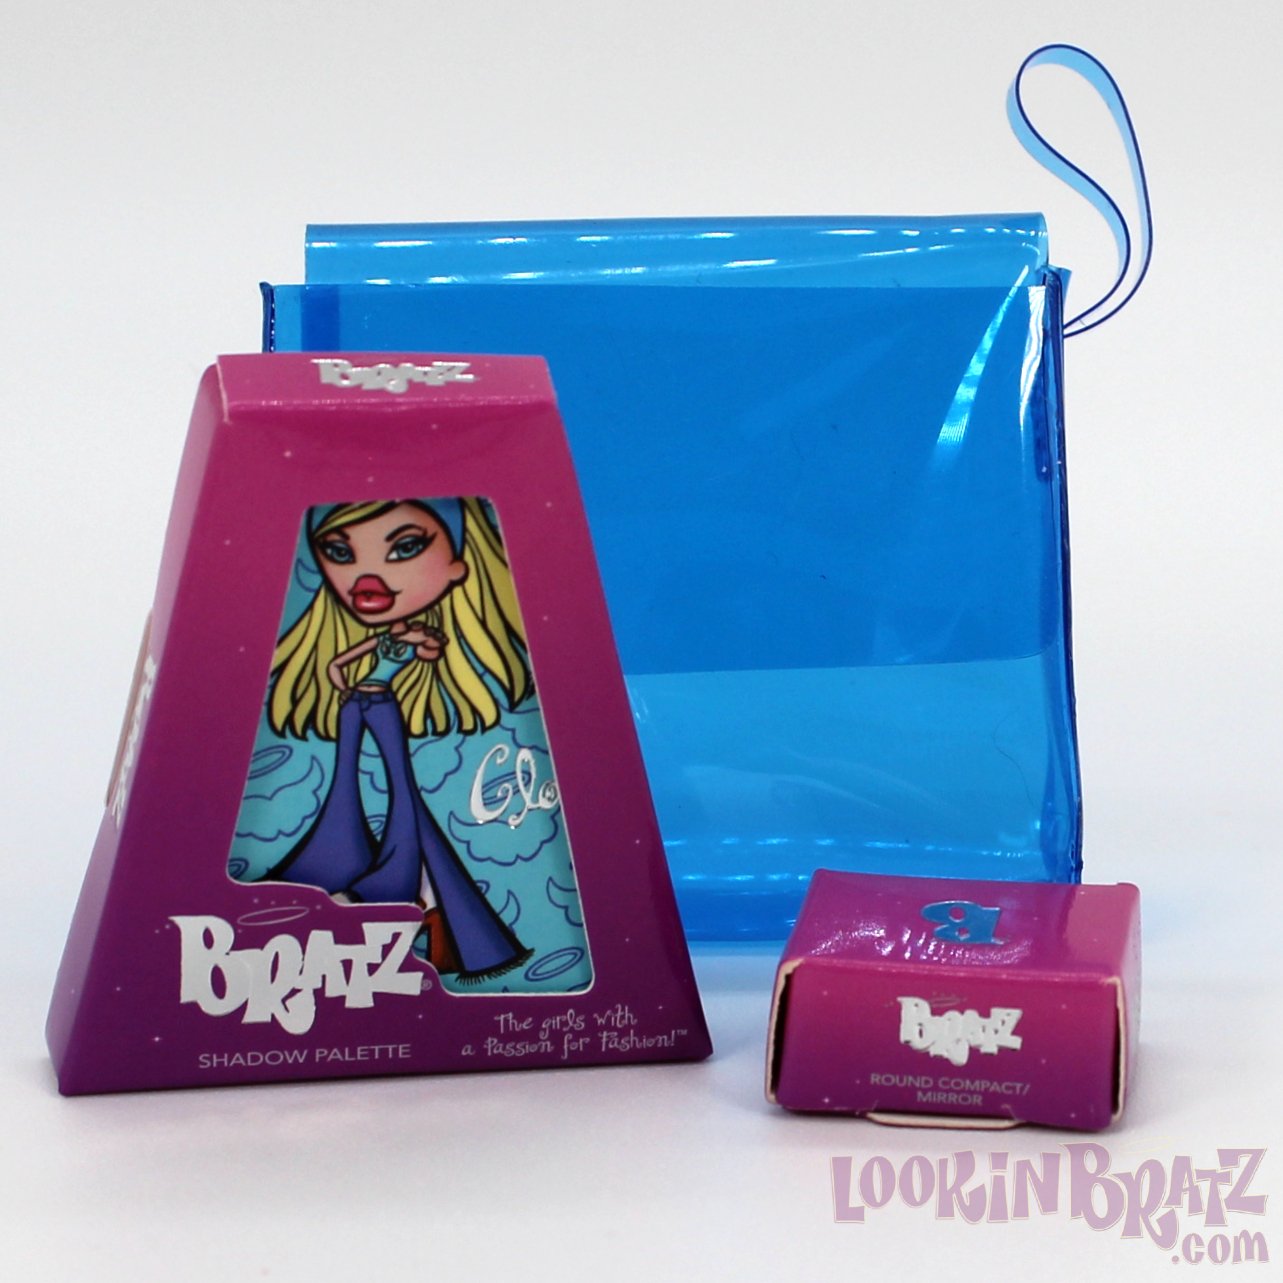 Bratz bag, Do not purchase, looking for offers